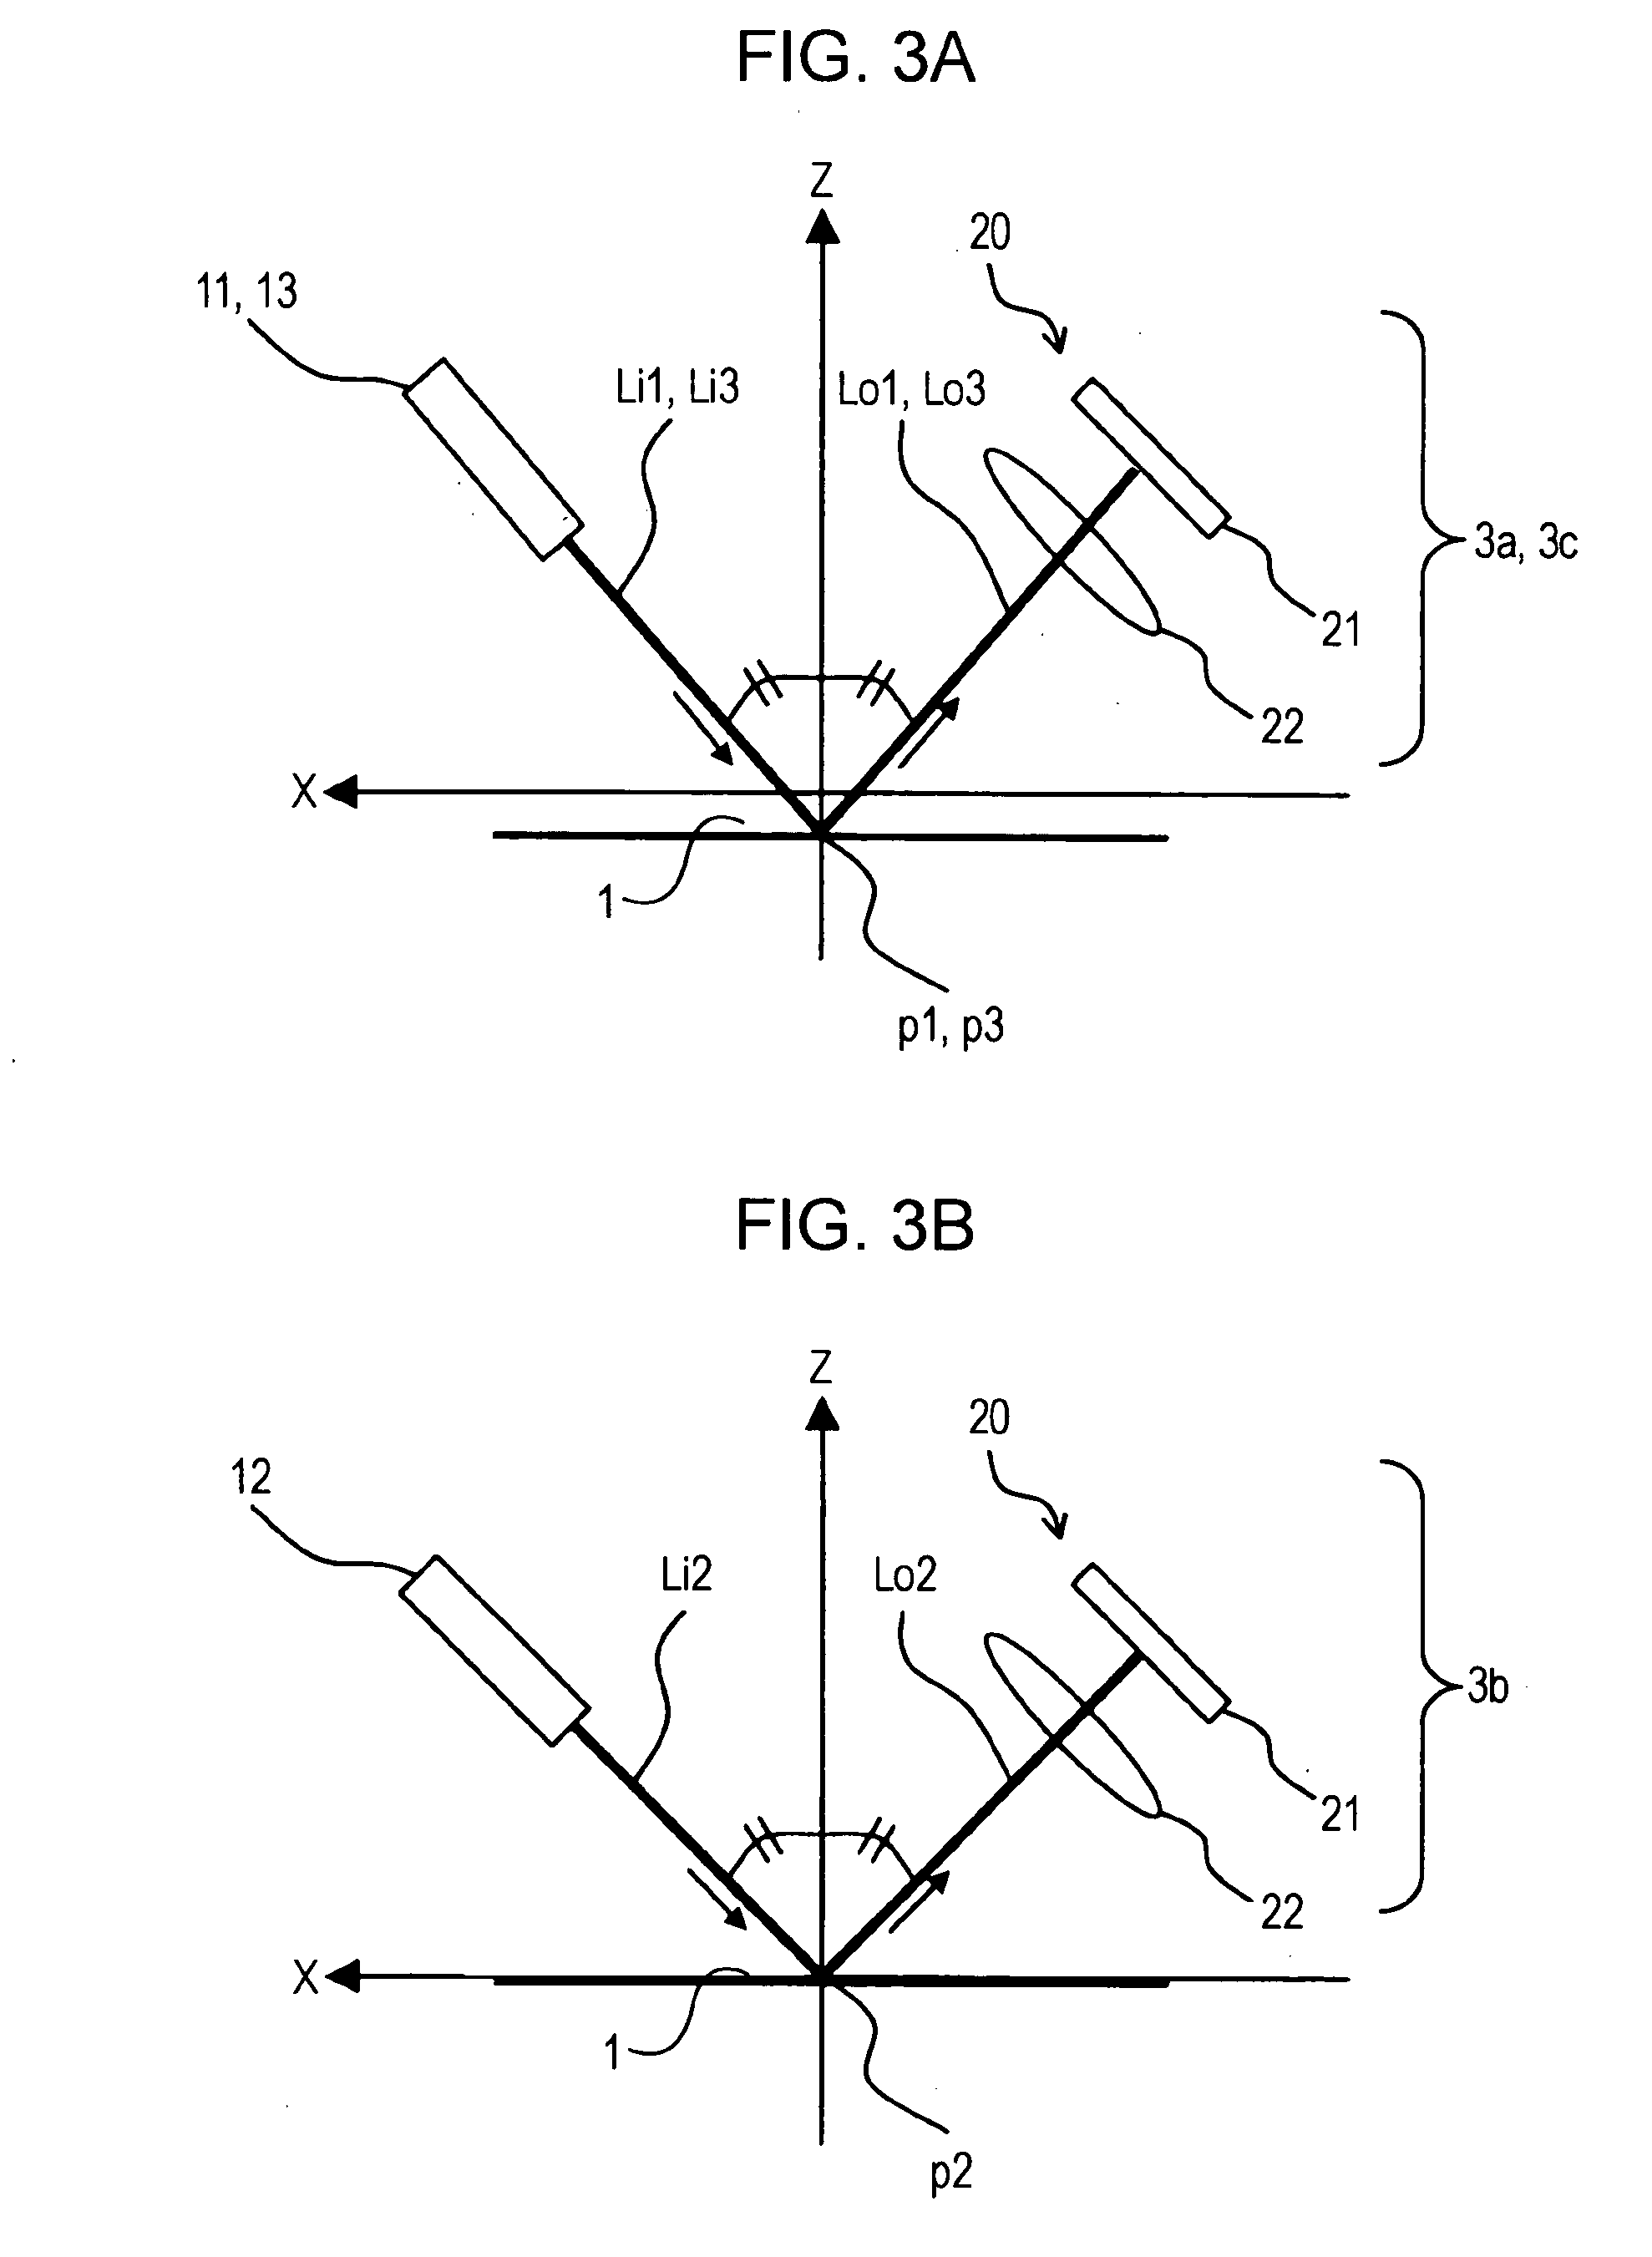 Apparatus and method for detecting tire shape